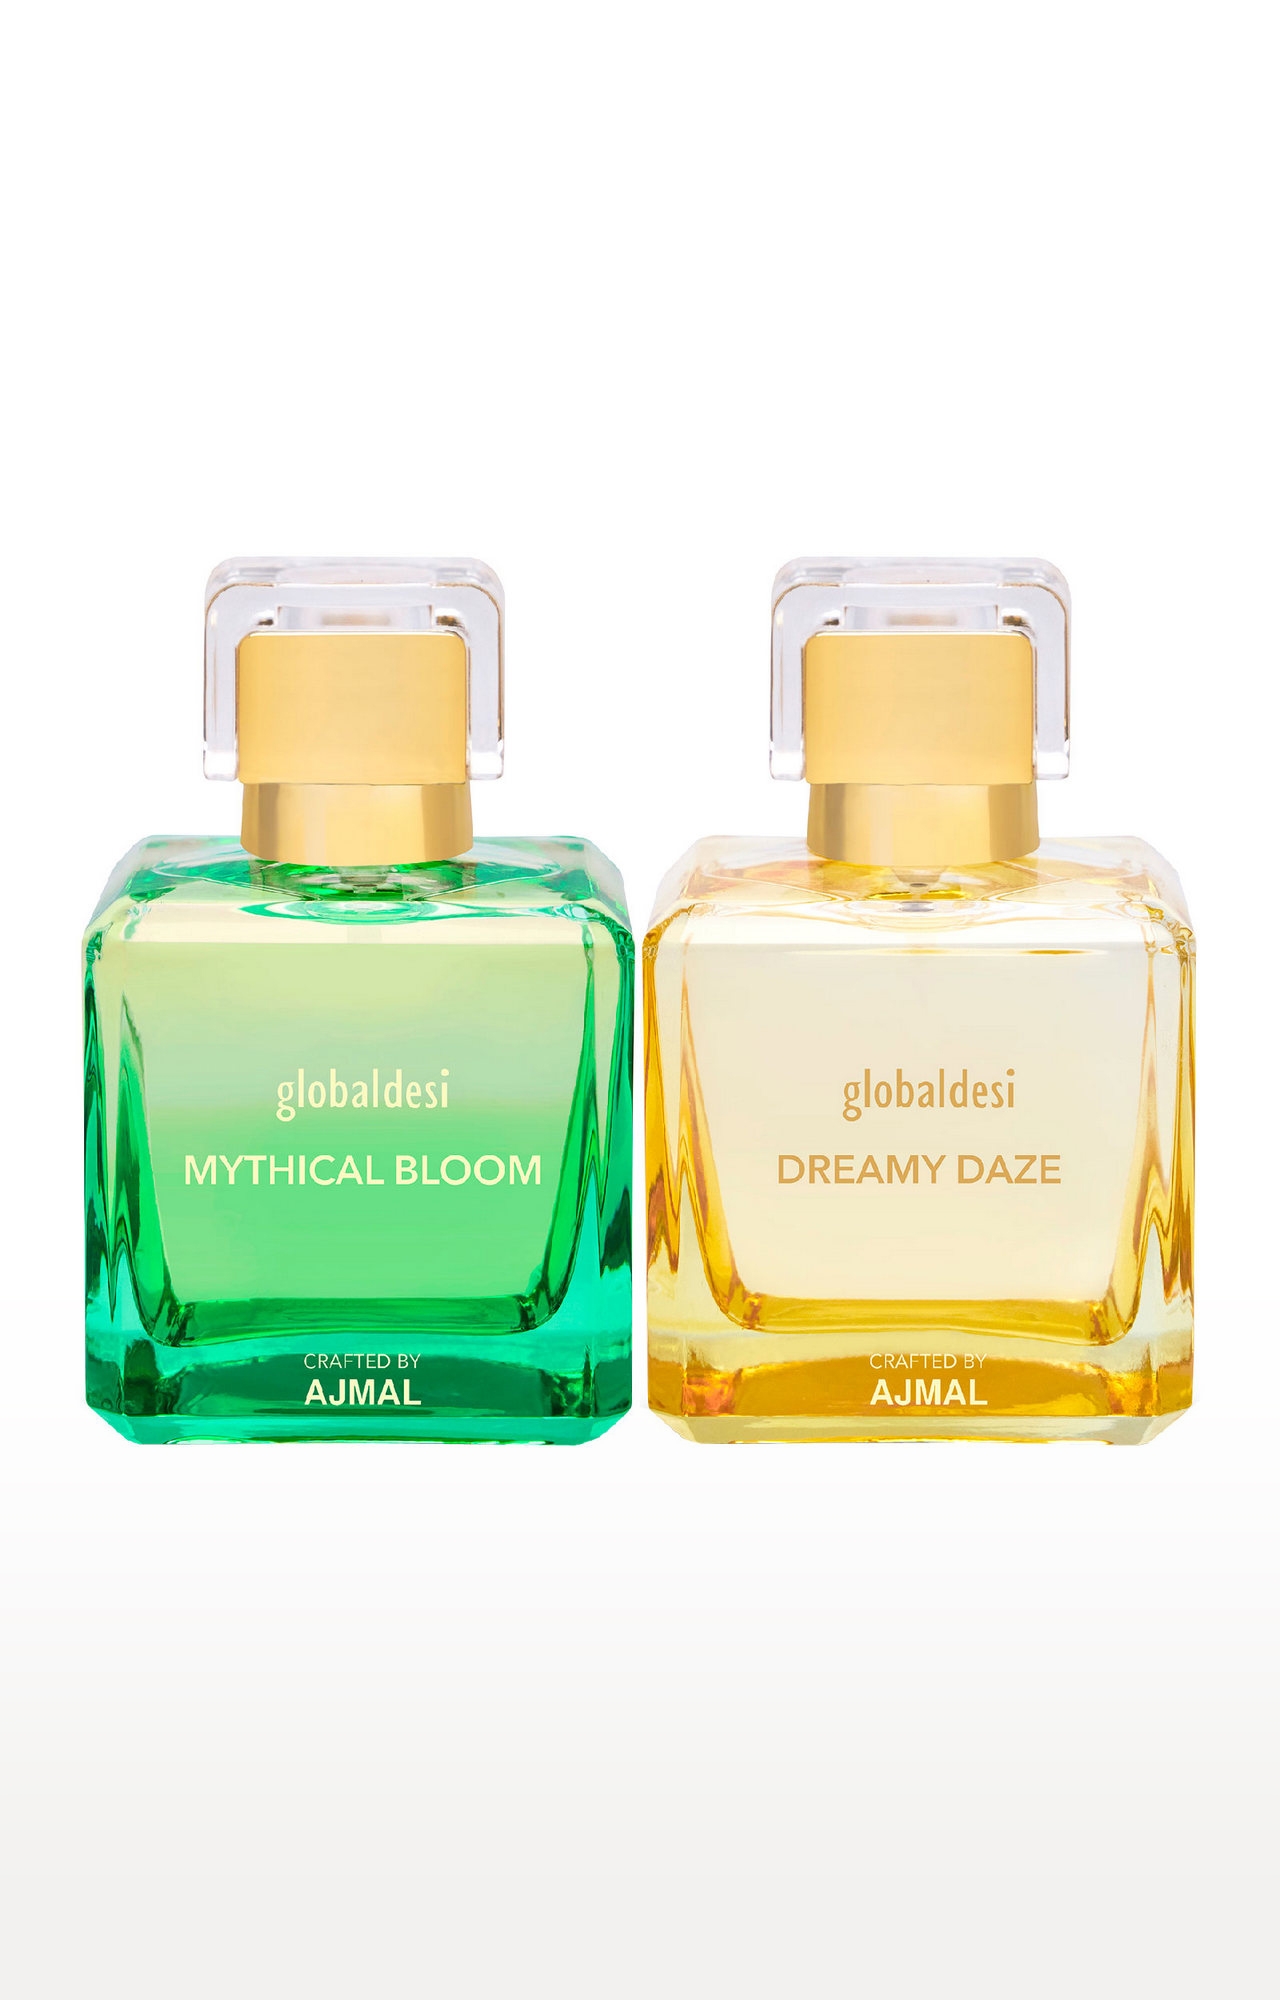 Global Desi Crafted By Ajmal | Global Mythical Bloom & Dreamy Daze Pack of 2 Eau De Parfum 50ML for Women Crafted by Ajmal + 2 Parfum Testers